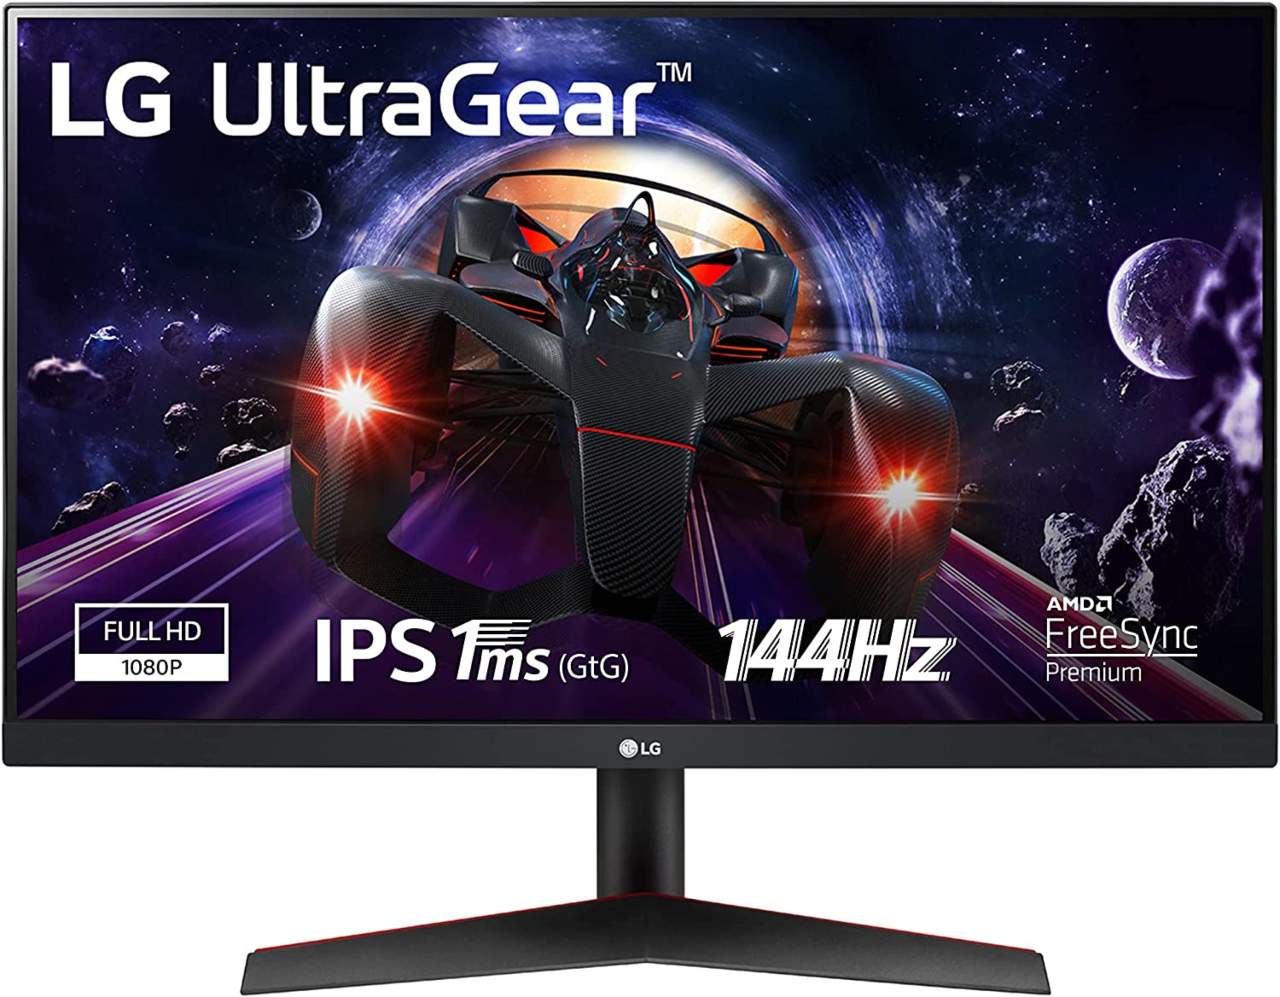 Il gaming monitor LG 24GN60T